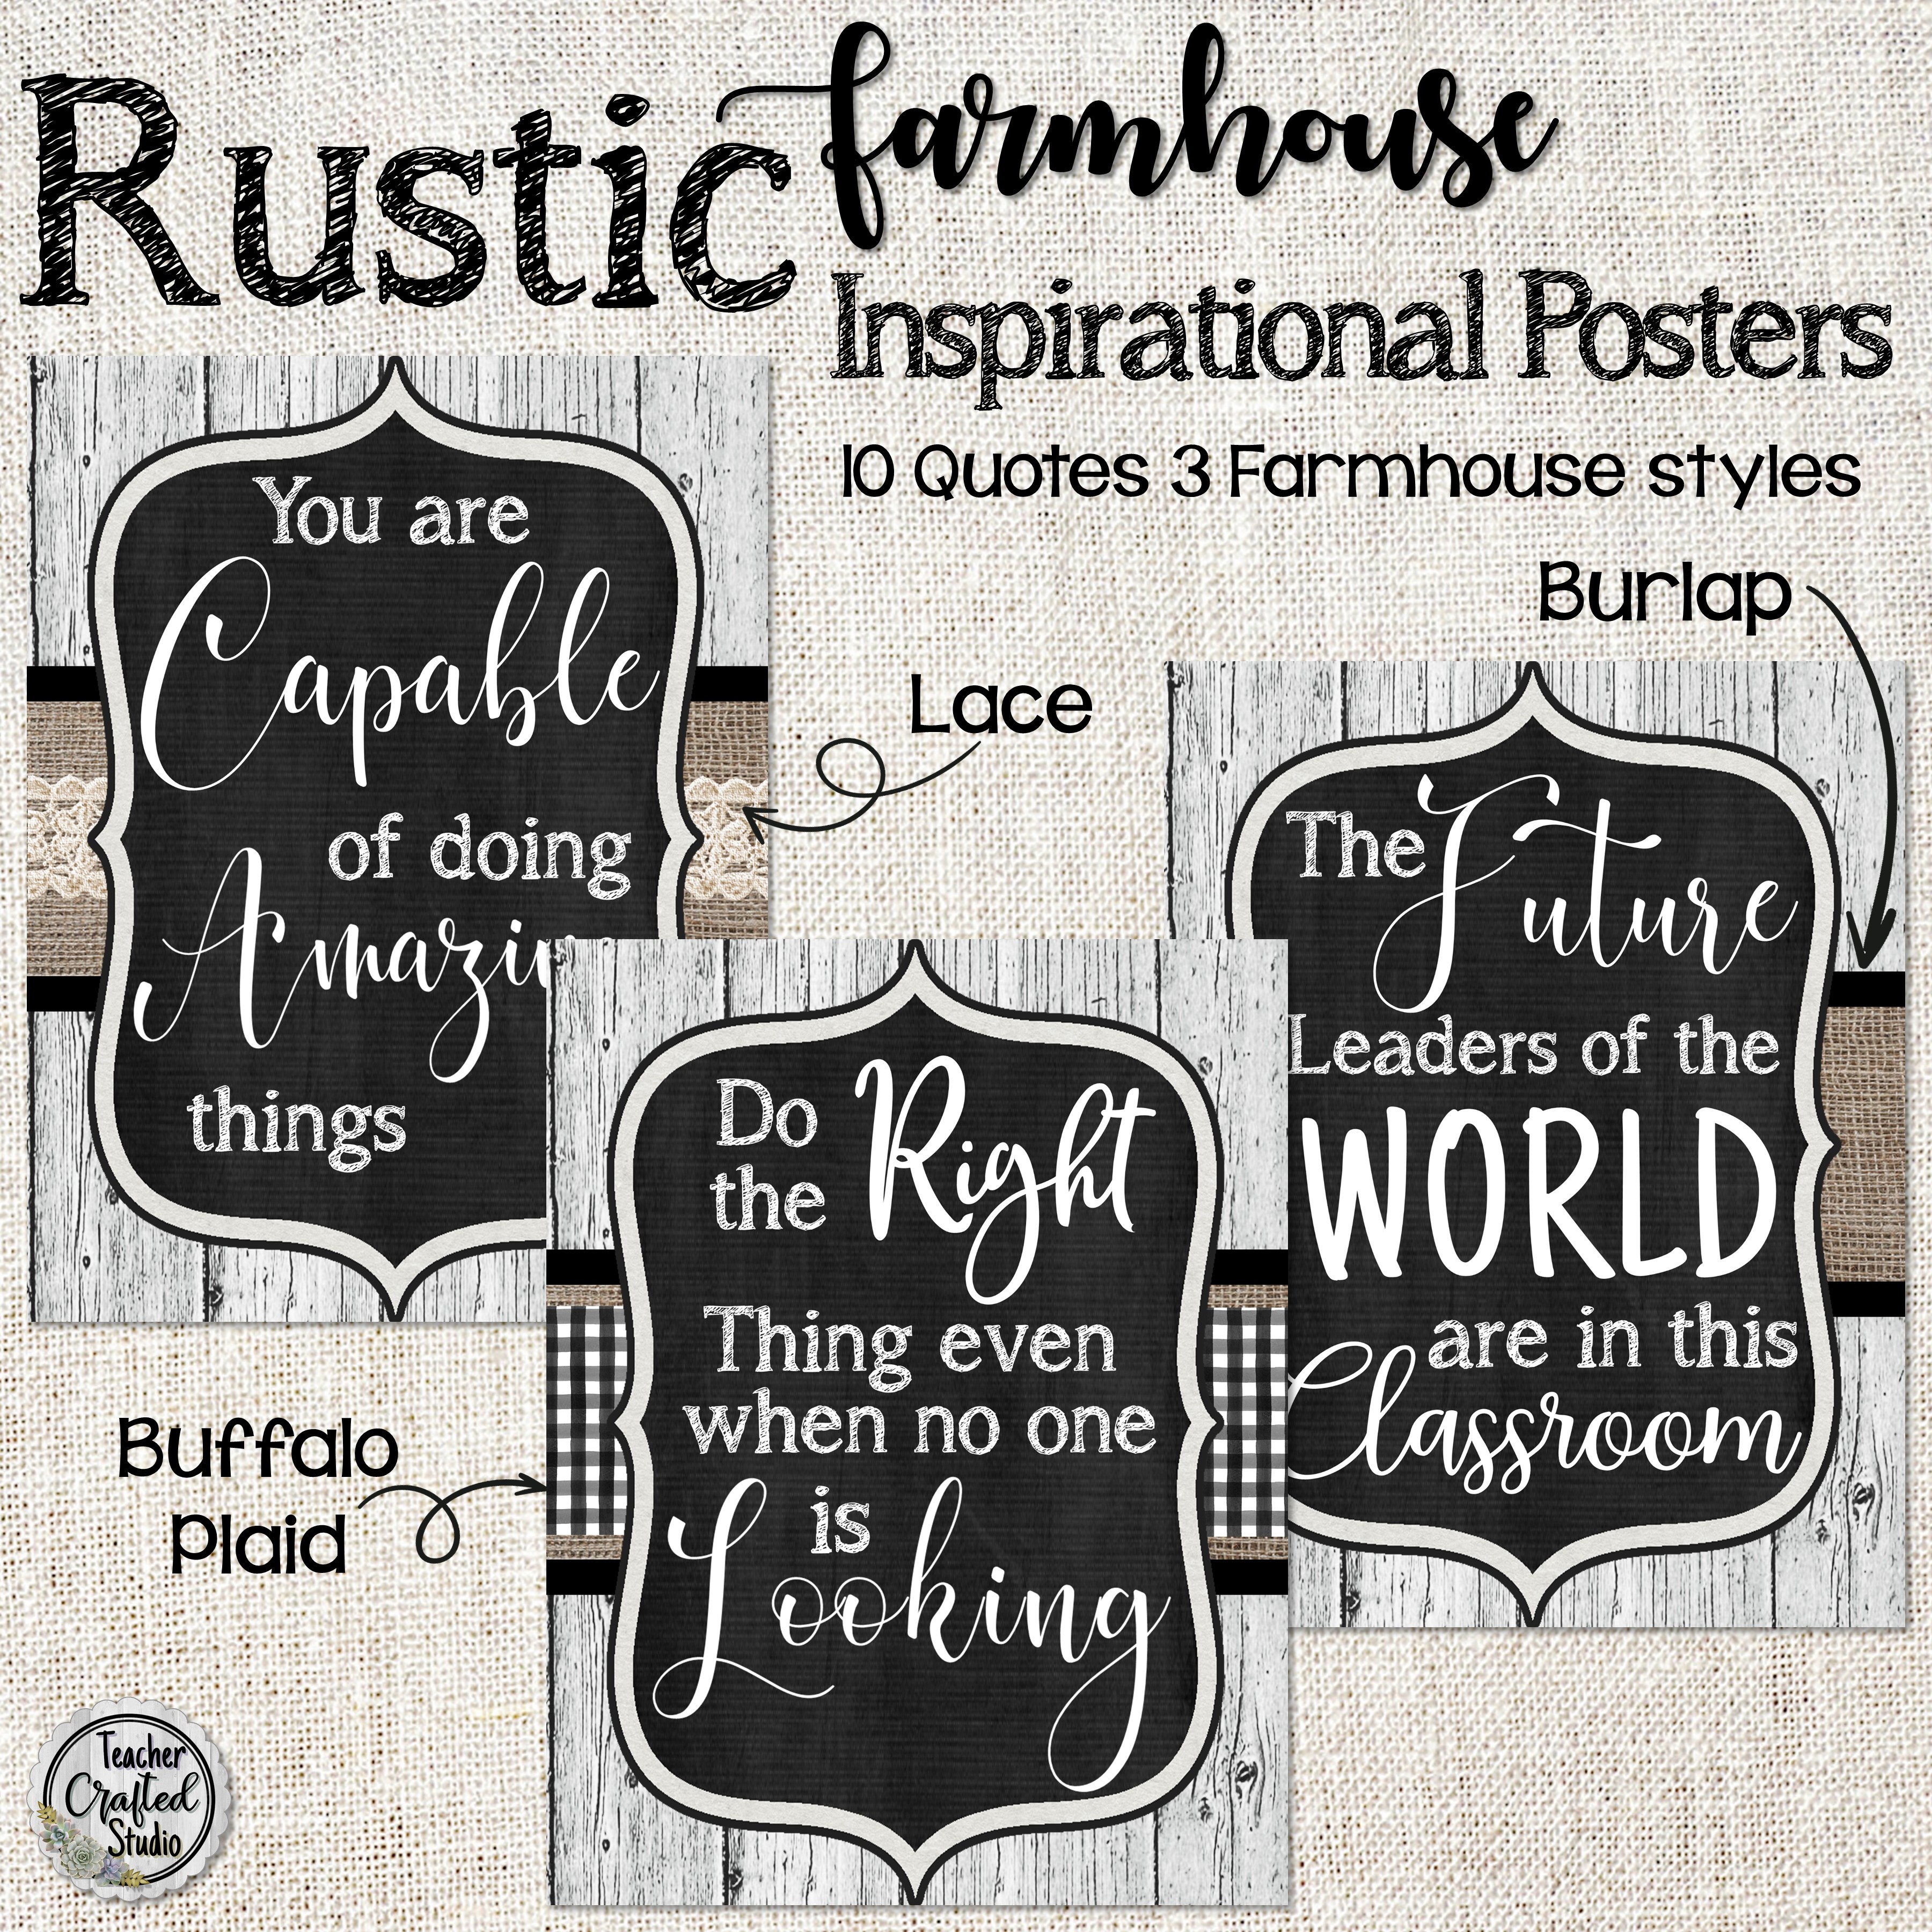 Rustic Farmhouse Inspirational Posters